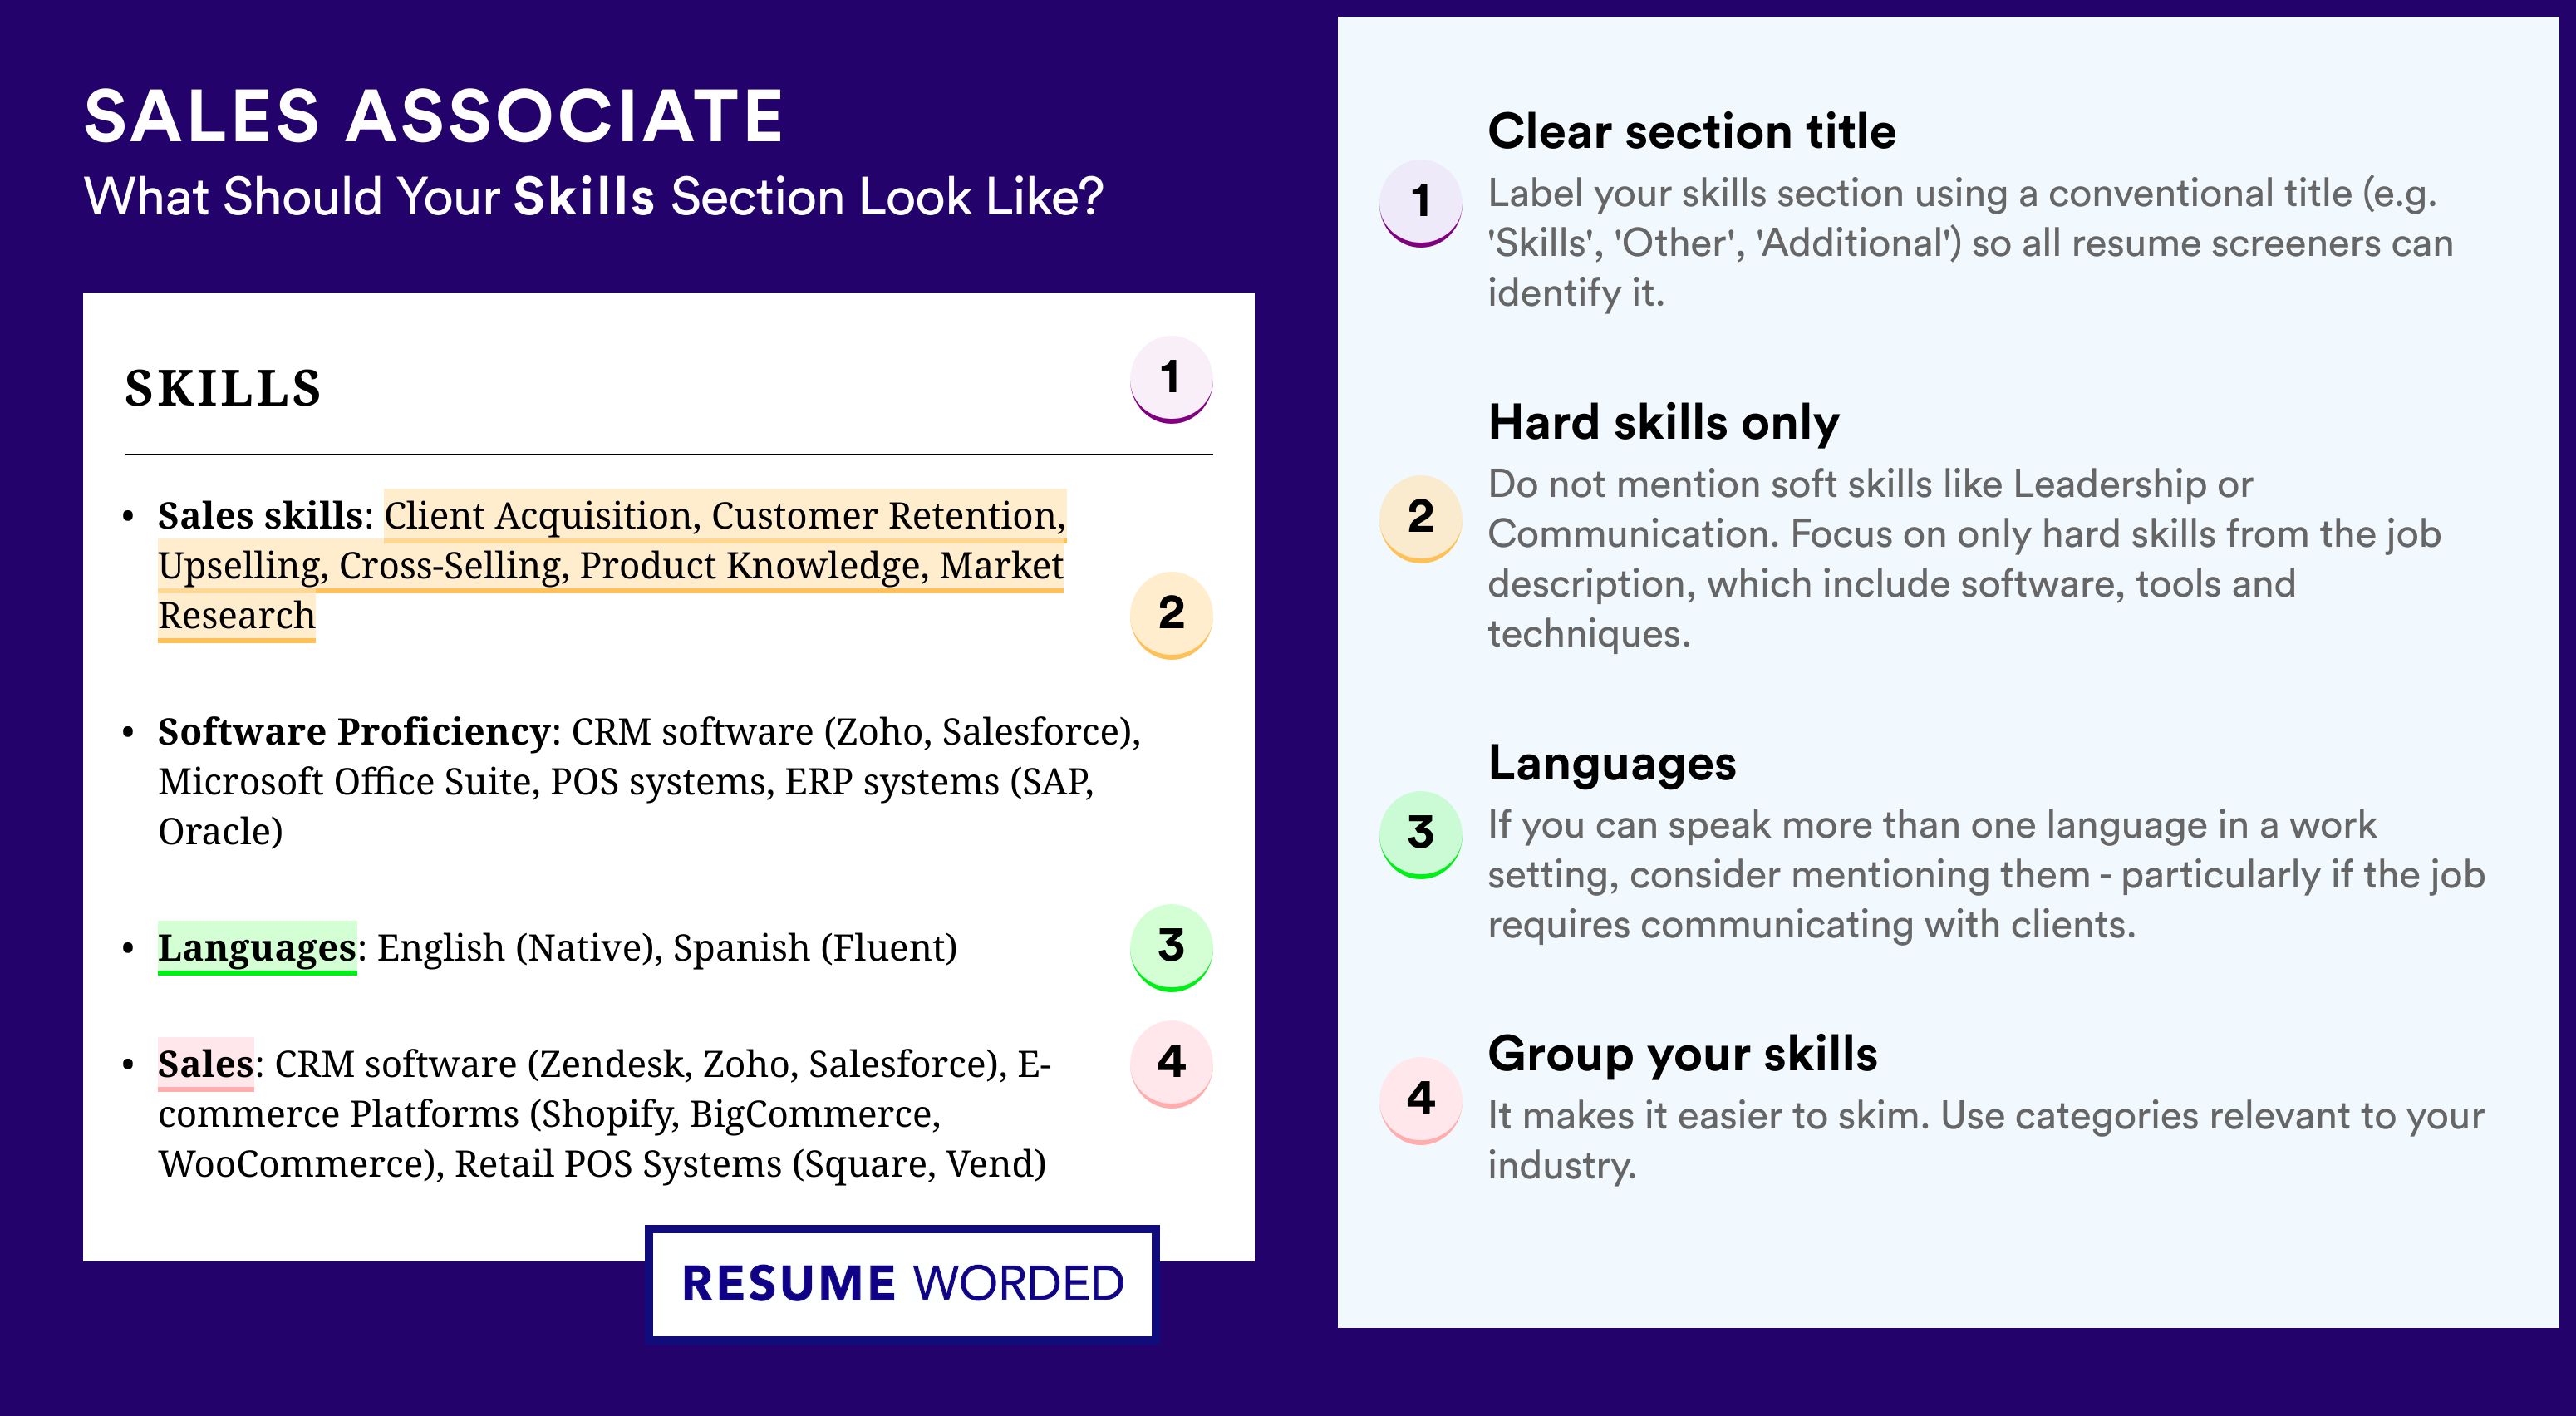 How To Write Your Skills Section - Sales Associate Roles